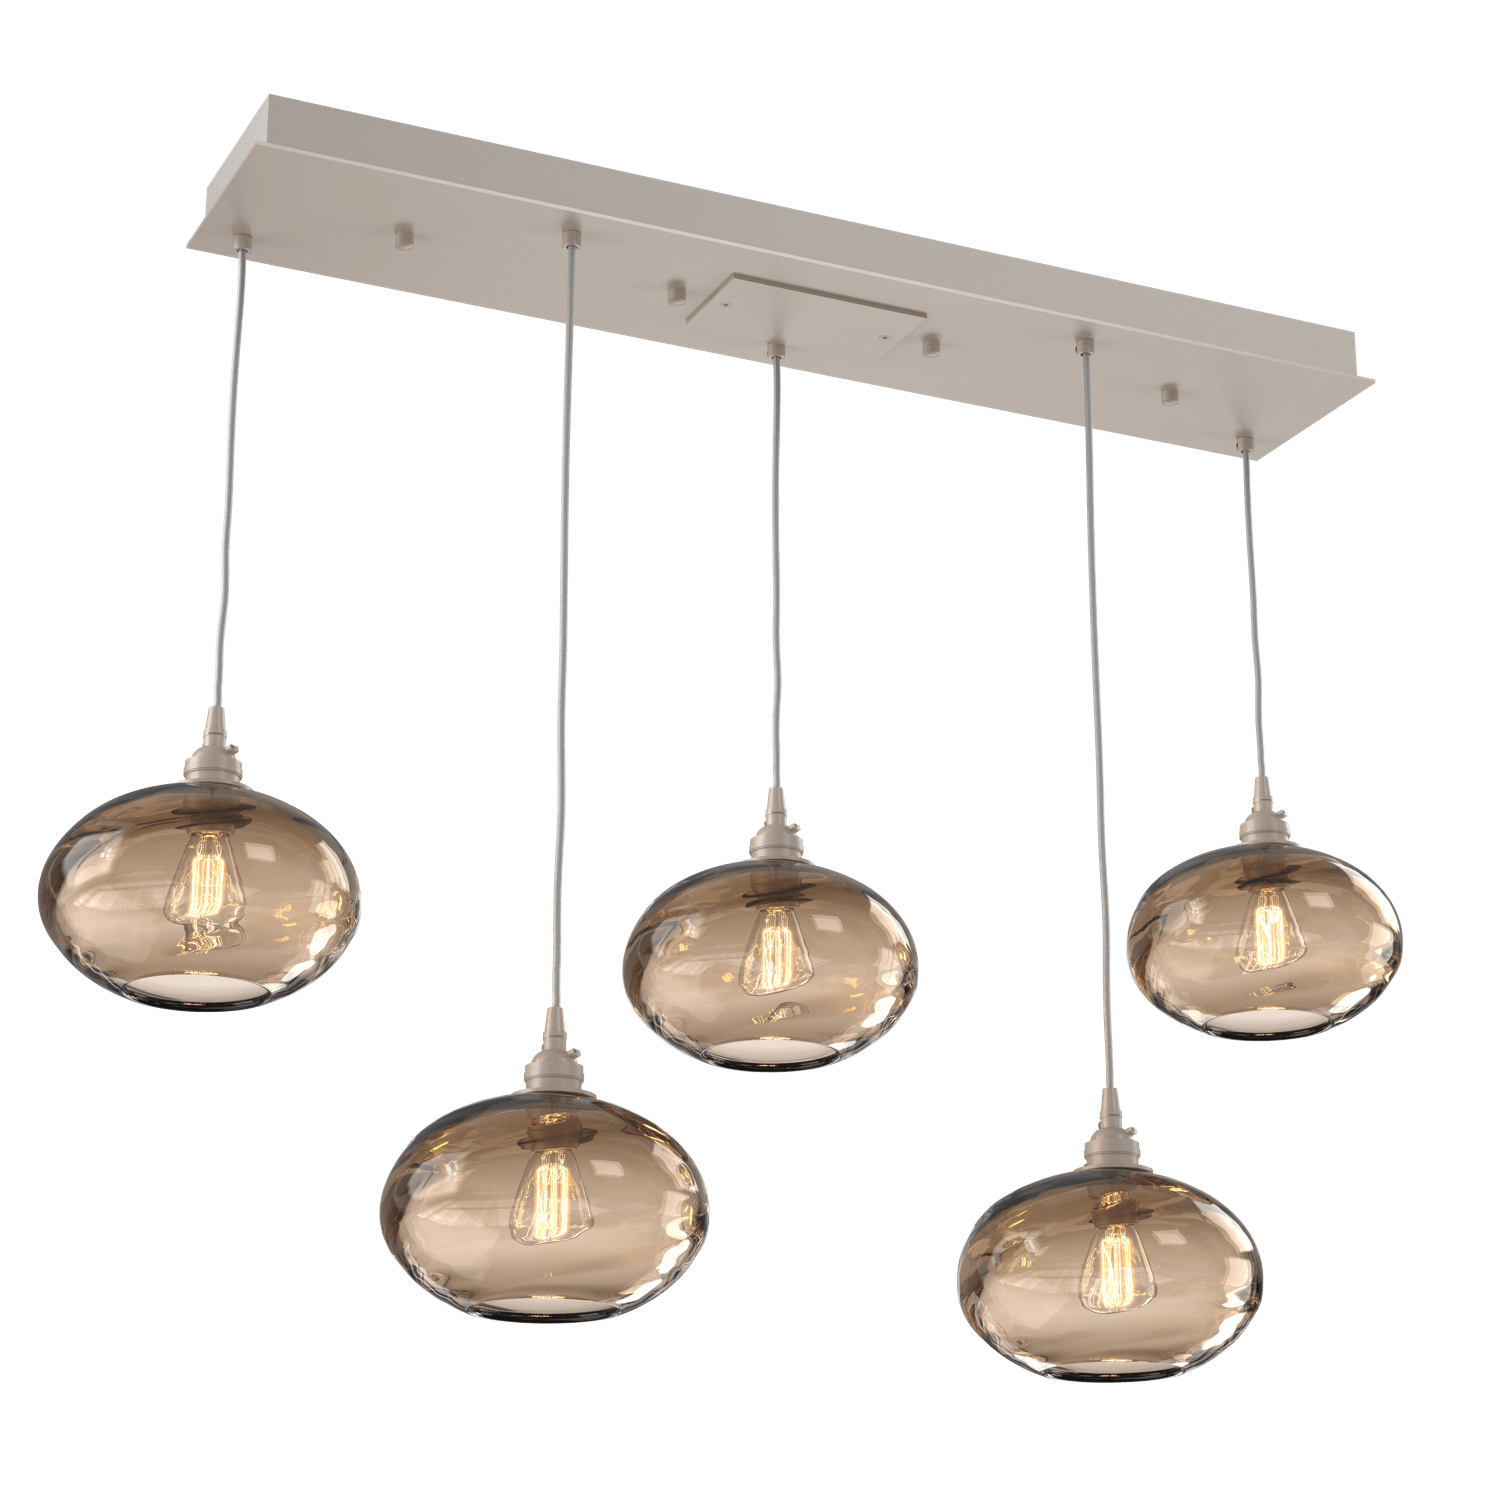 PLB0036-05-BS-OB-Hammerton-Studio-Optic-Blown-Glass-Coppa-5-light-linear-pendant-chandelier-with-metallic-beige-silver-finish-and-optic-bronze-blown-glass-shades-and-incandescent-lamping